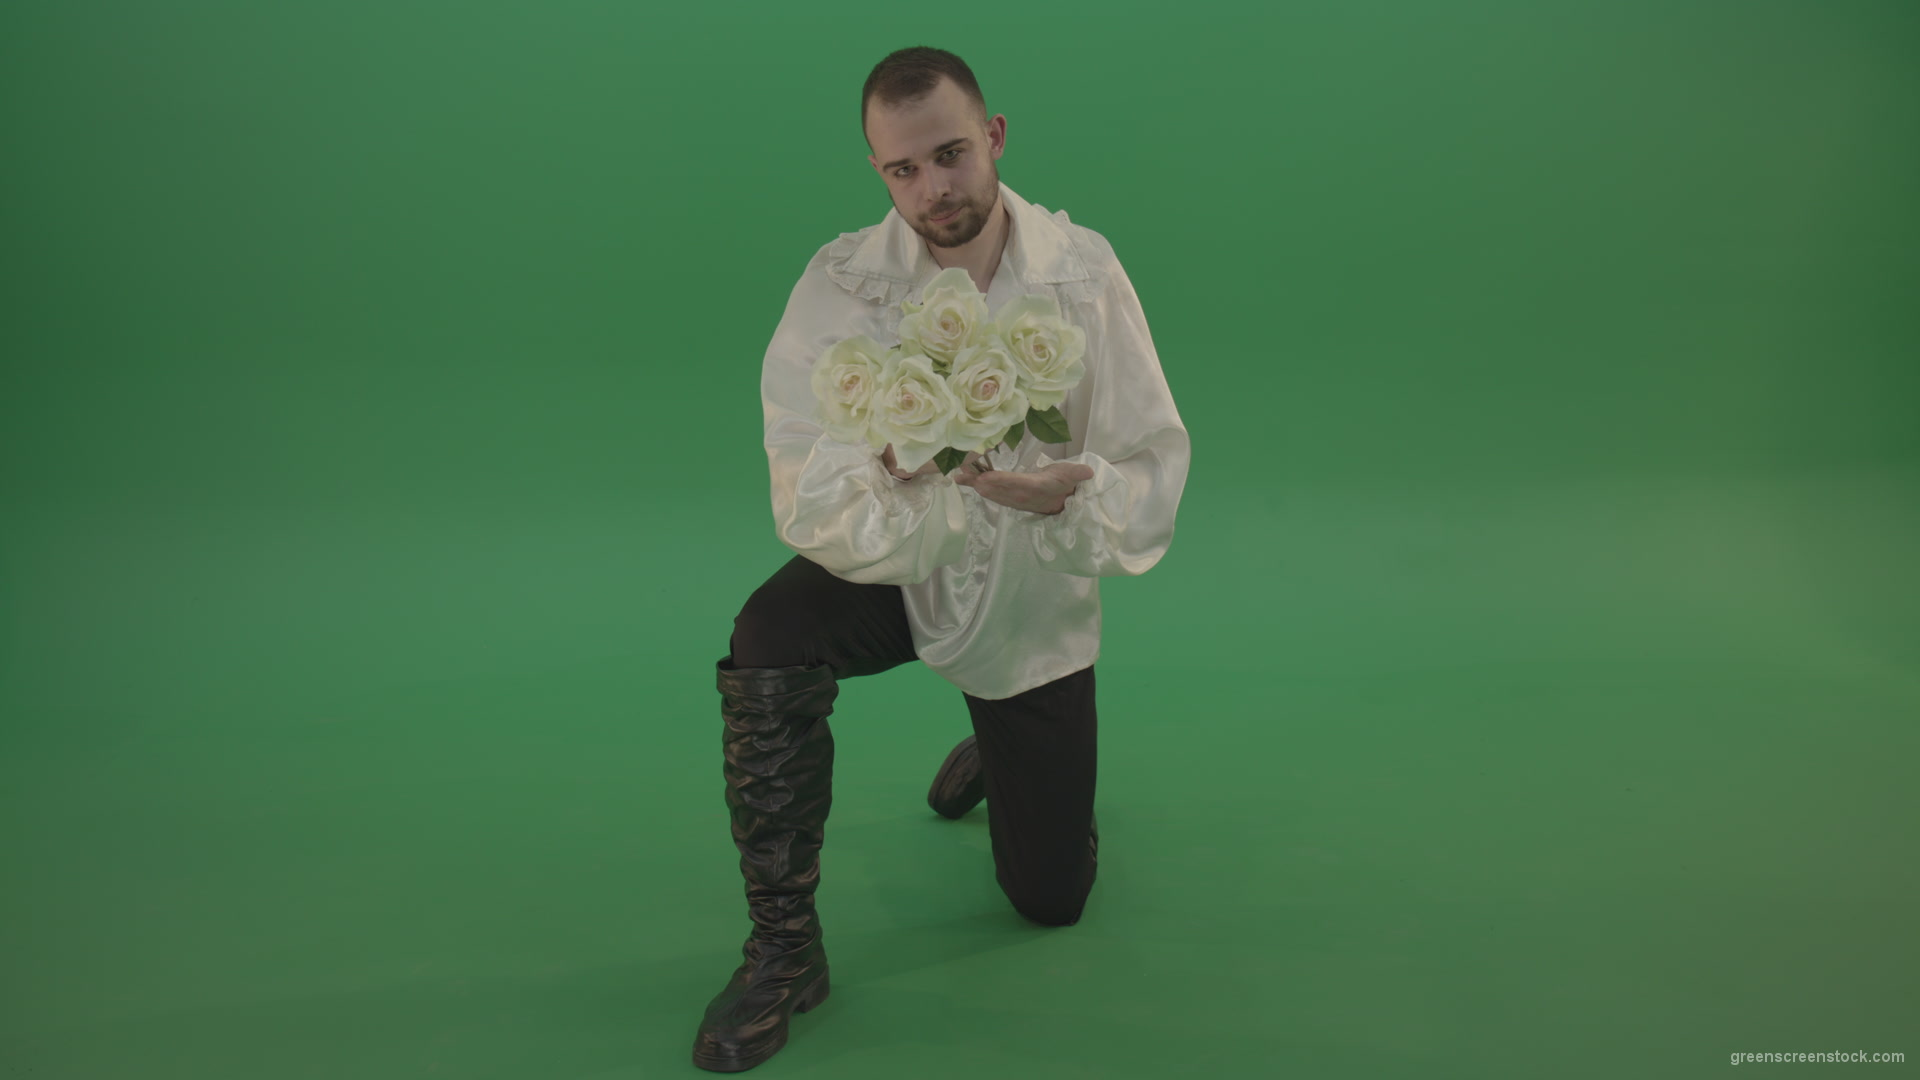 Medieval-man-gives-white-flowers-standing-on-one-knee-isolated-in-green-screen-studio_005 Green Screen Stock